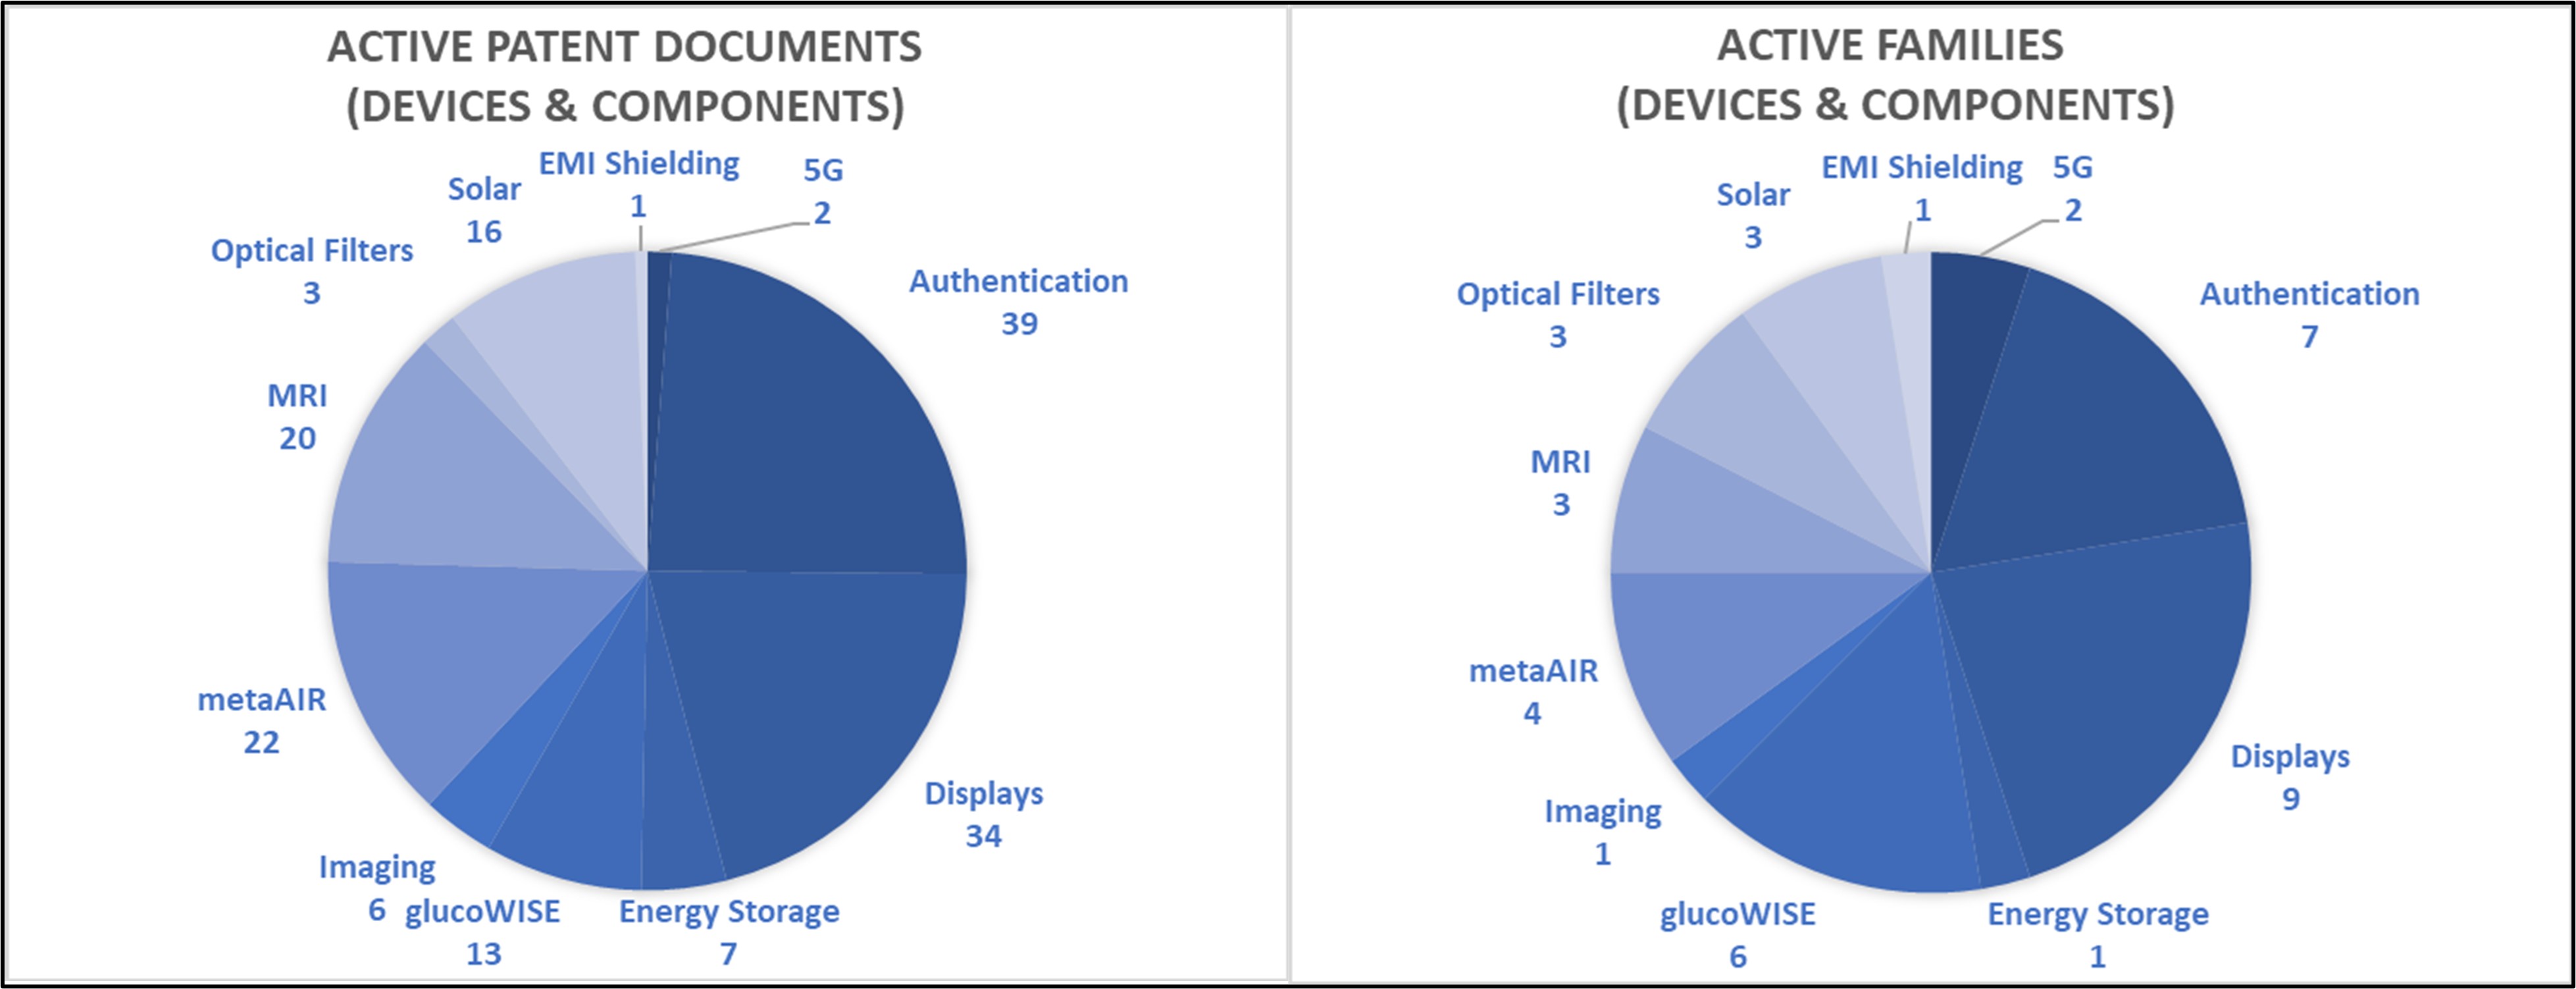 Devices and Components by Technology